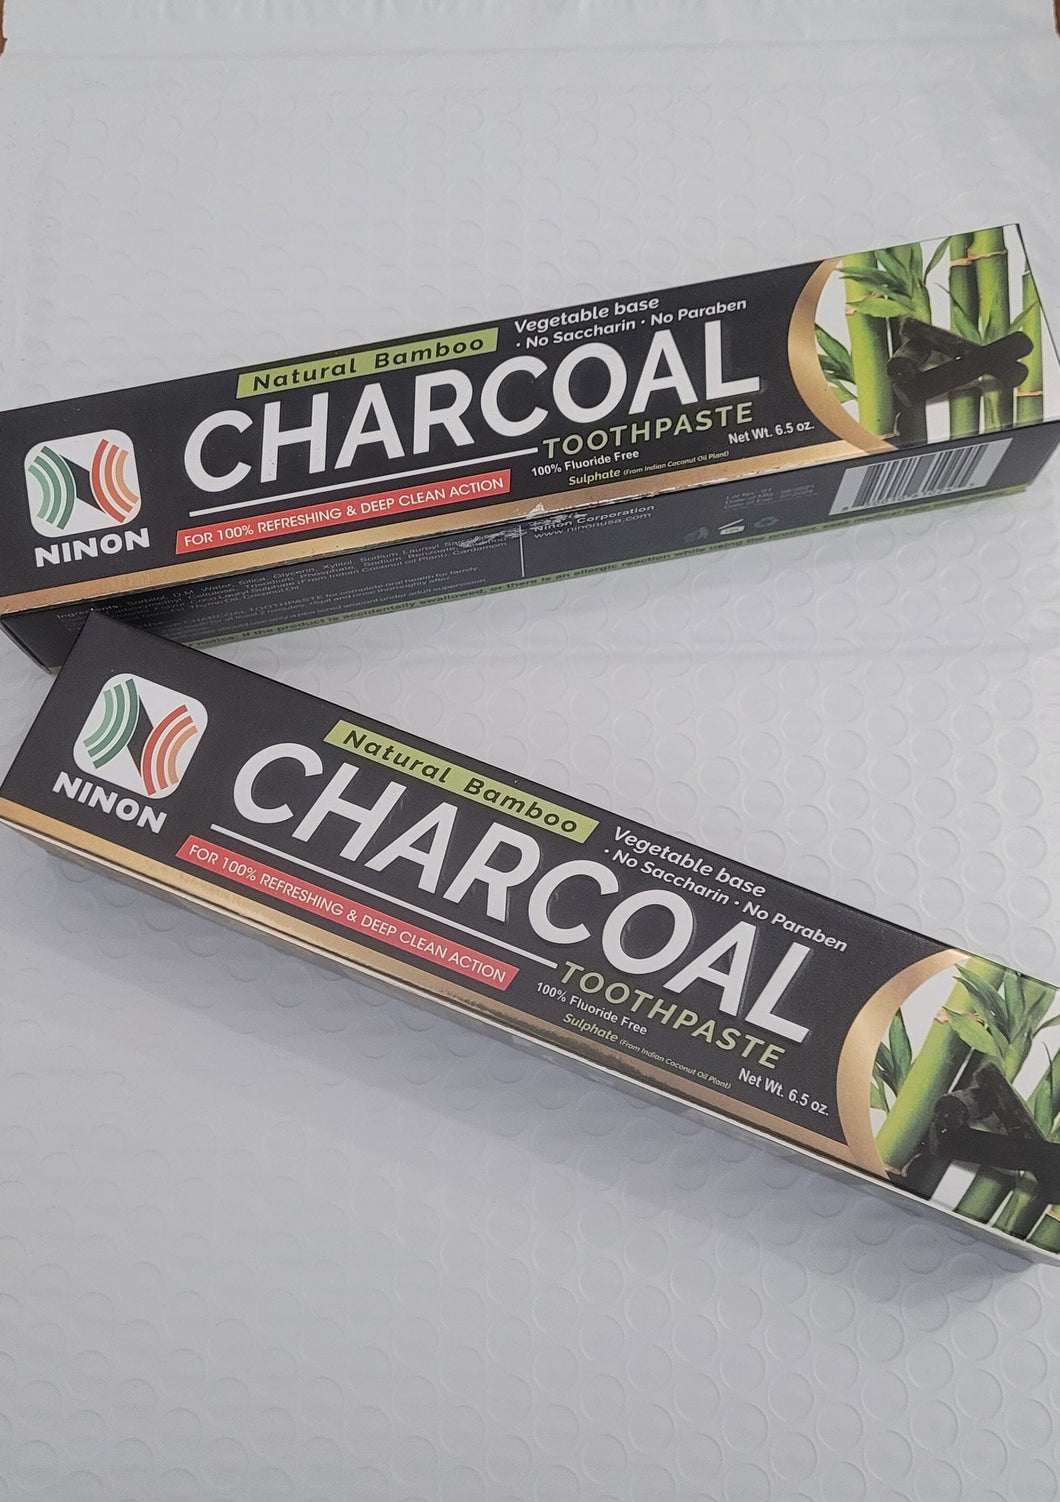 Natural Charcoal Toothpaste